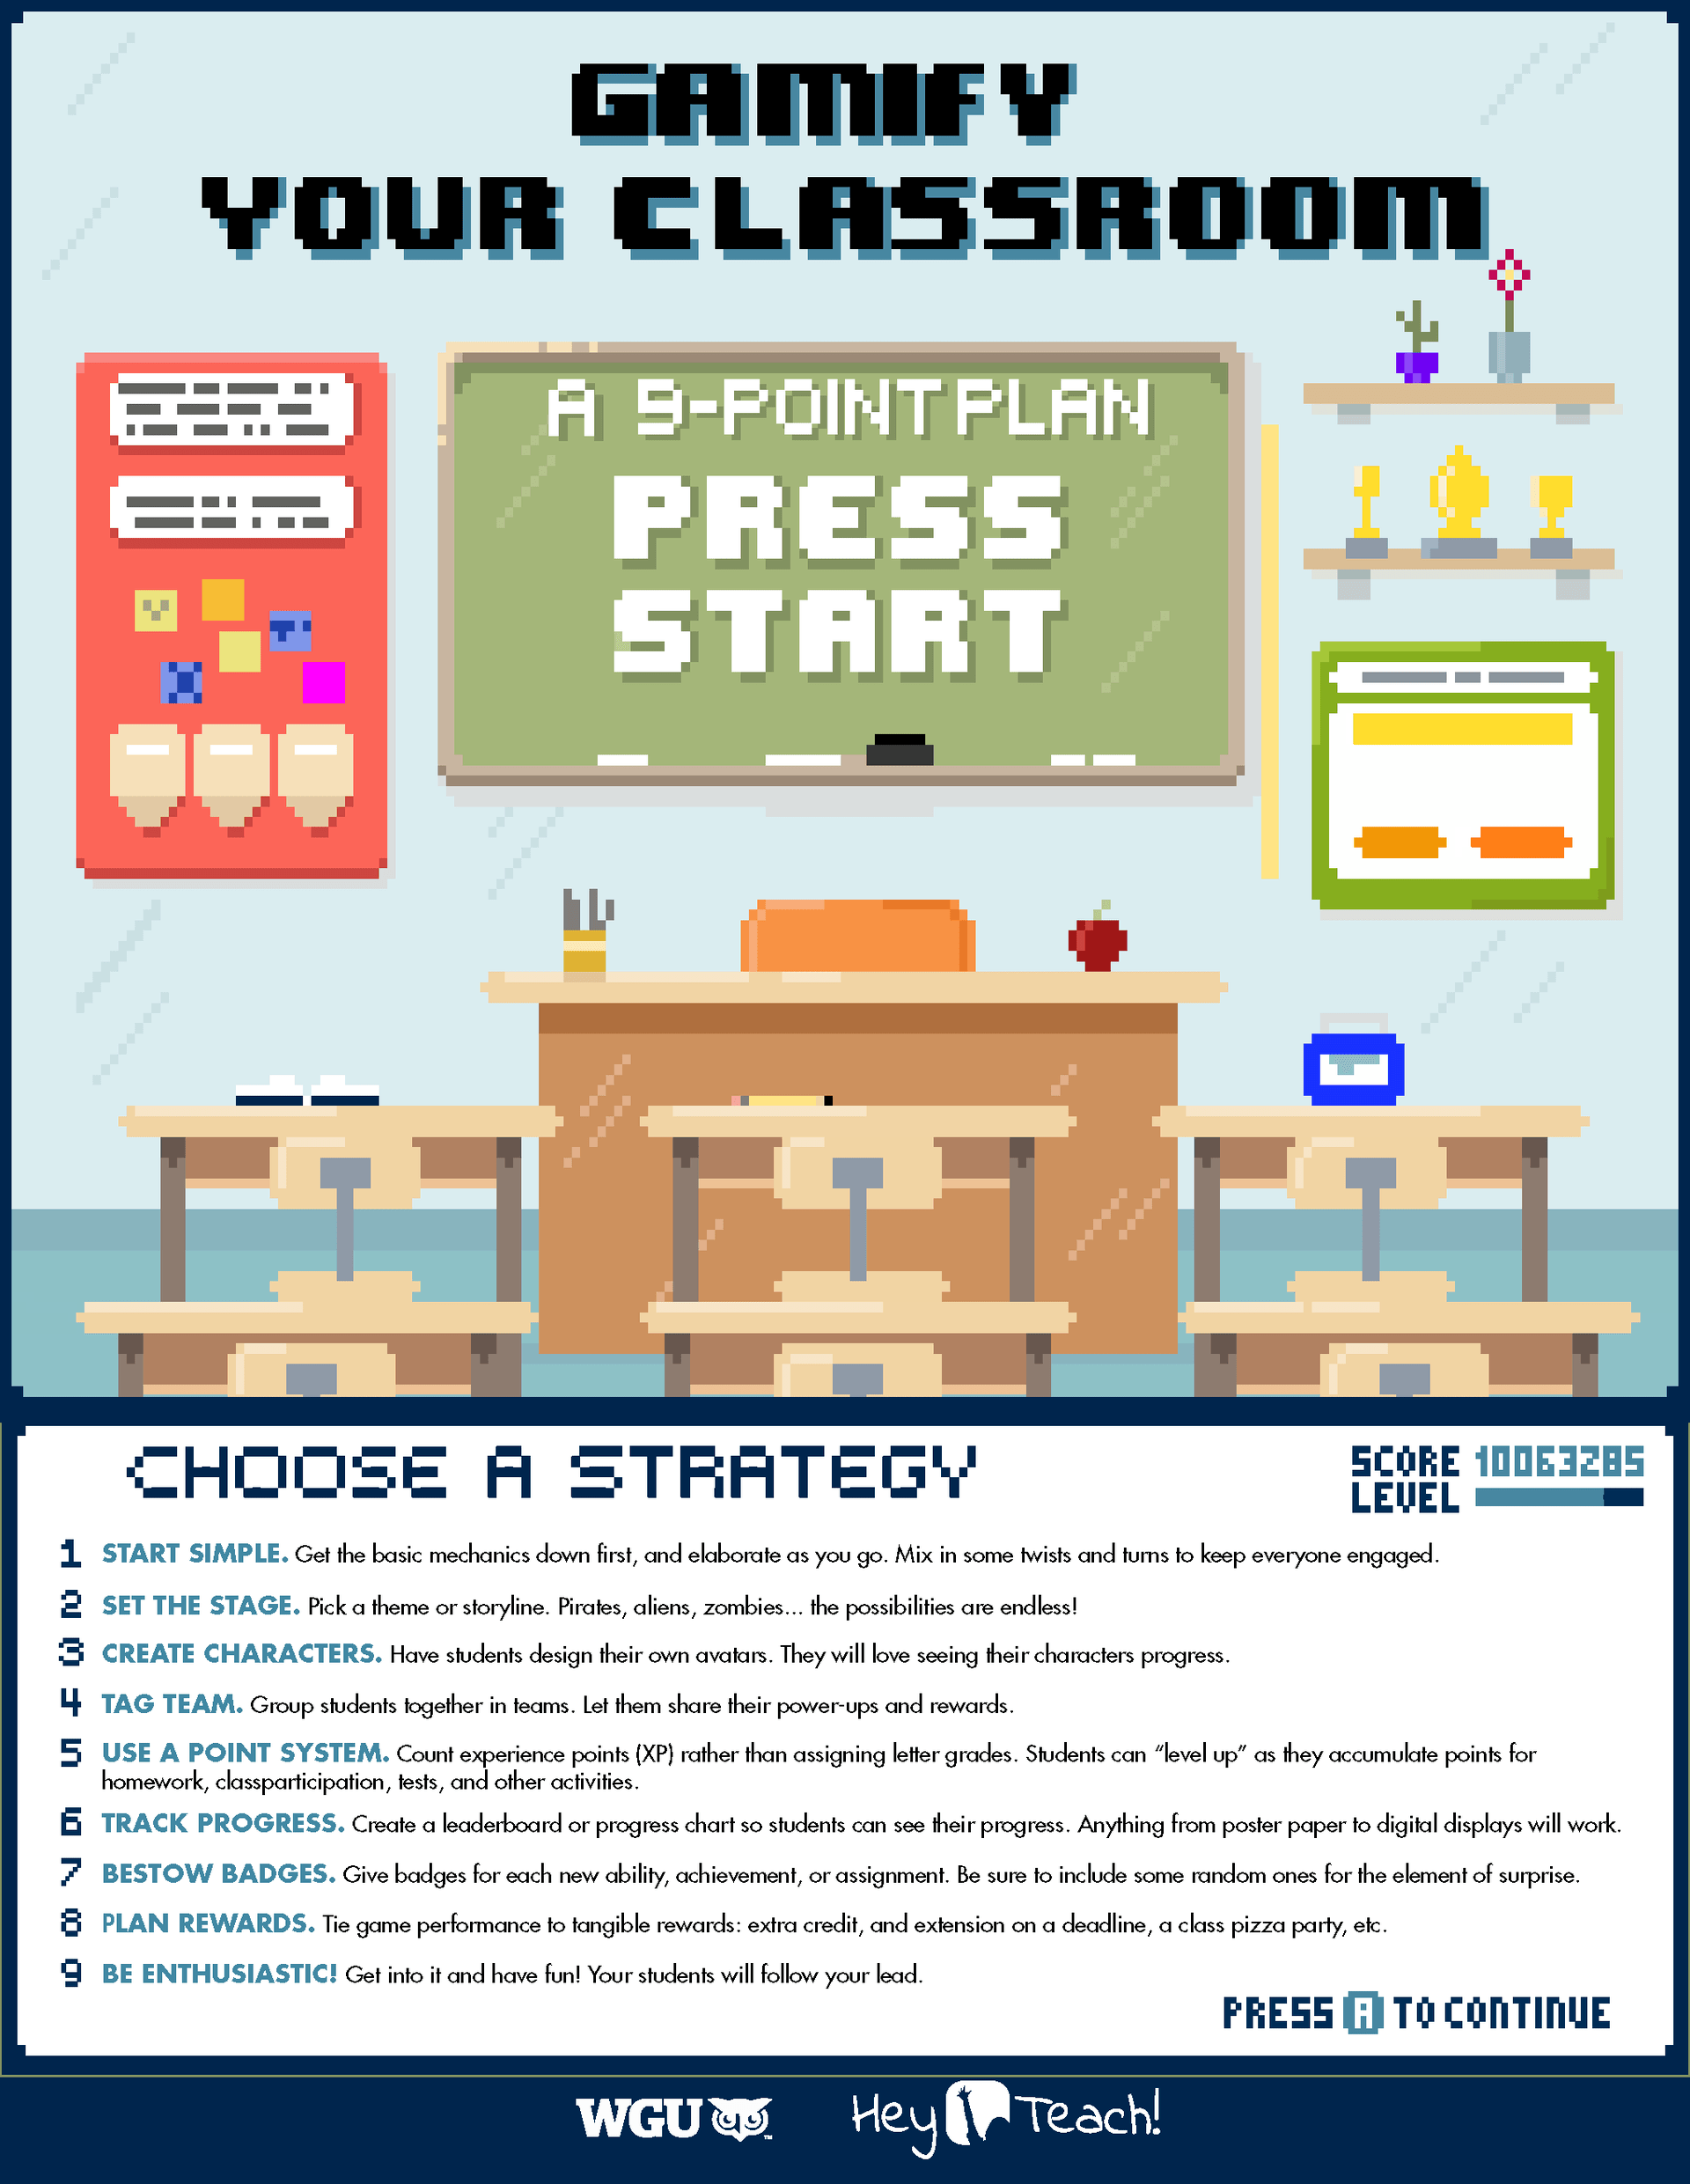 9 Key Elements of Classroom Gamification Infographic